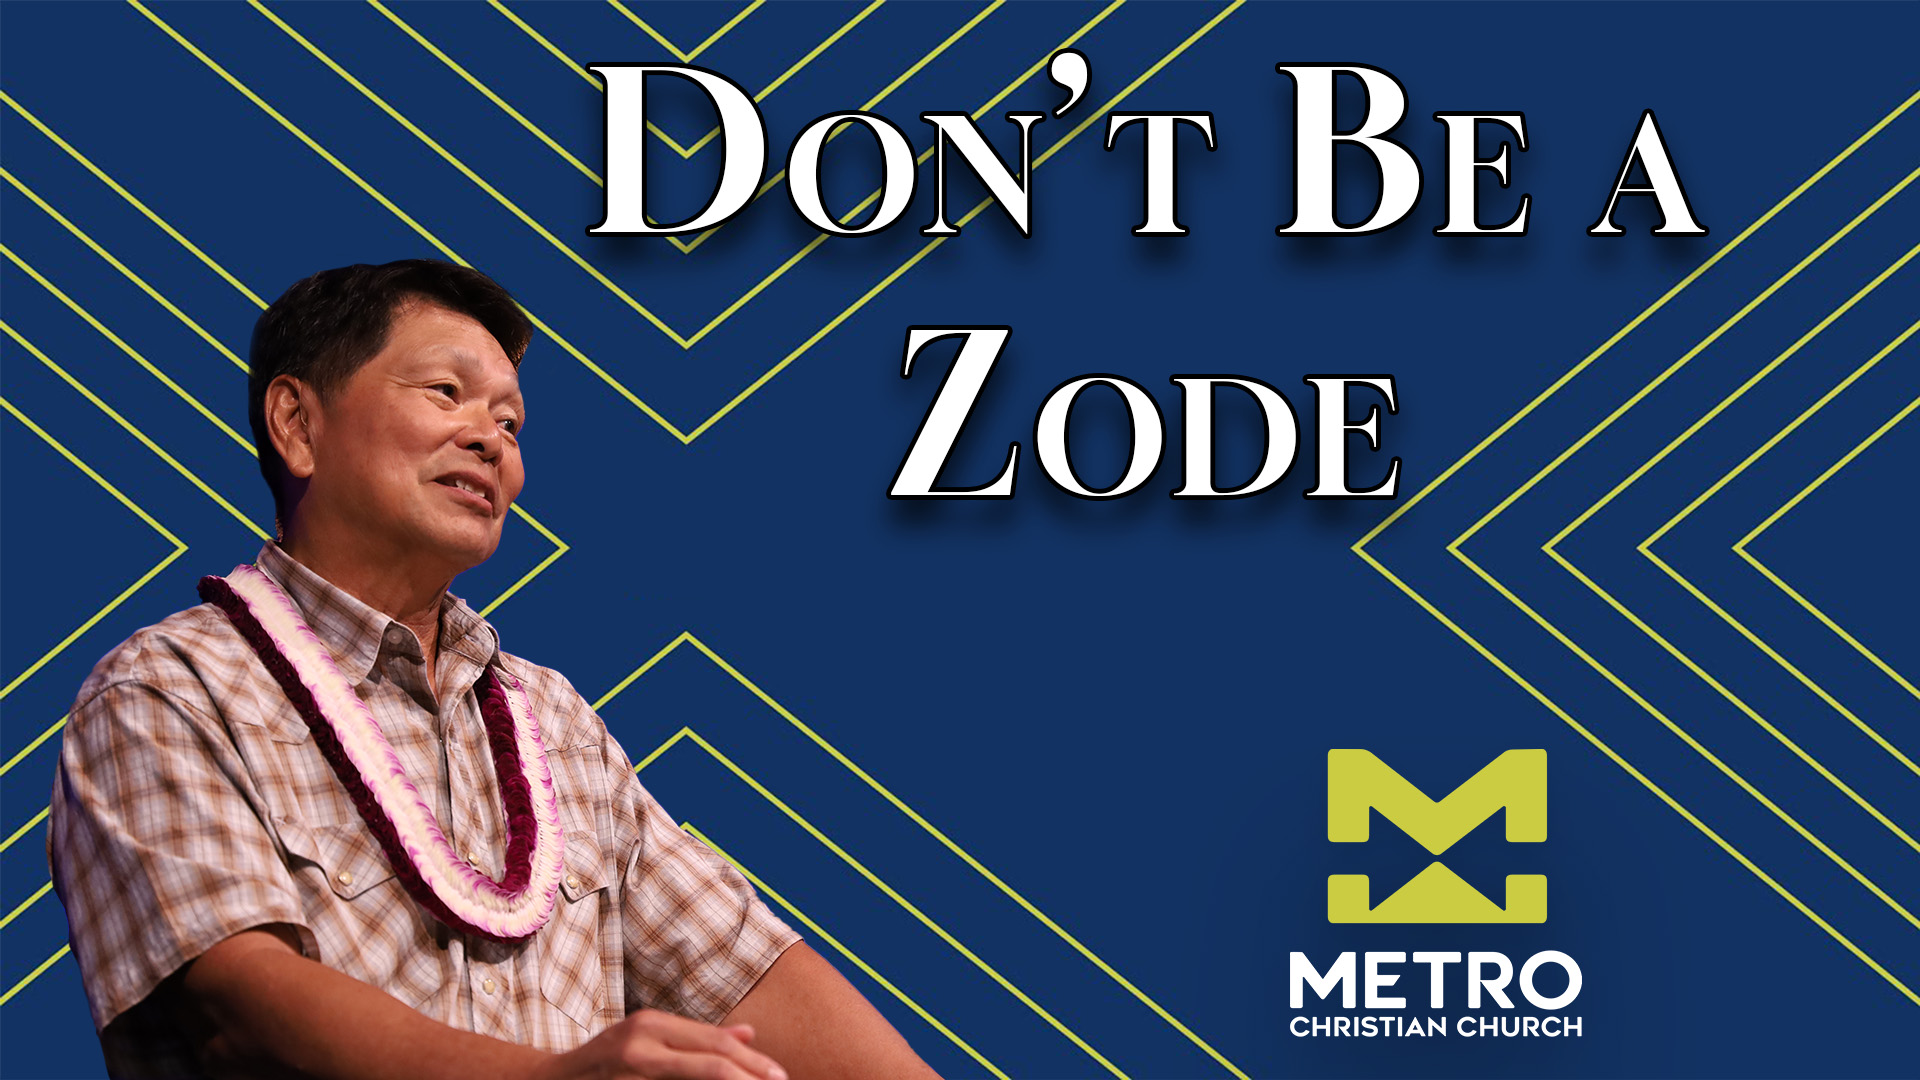 Don't be a Zode